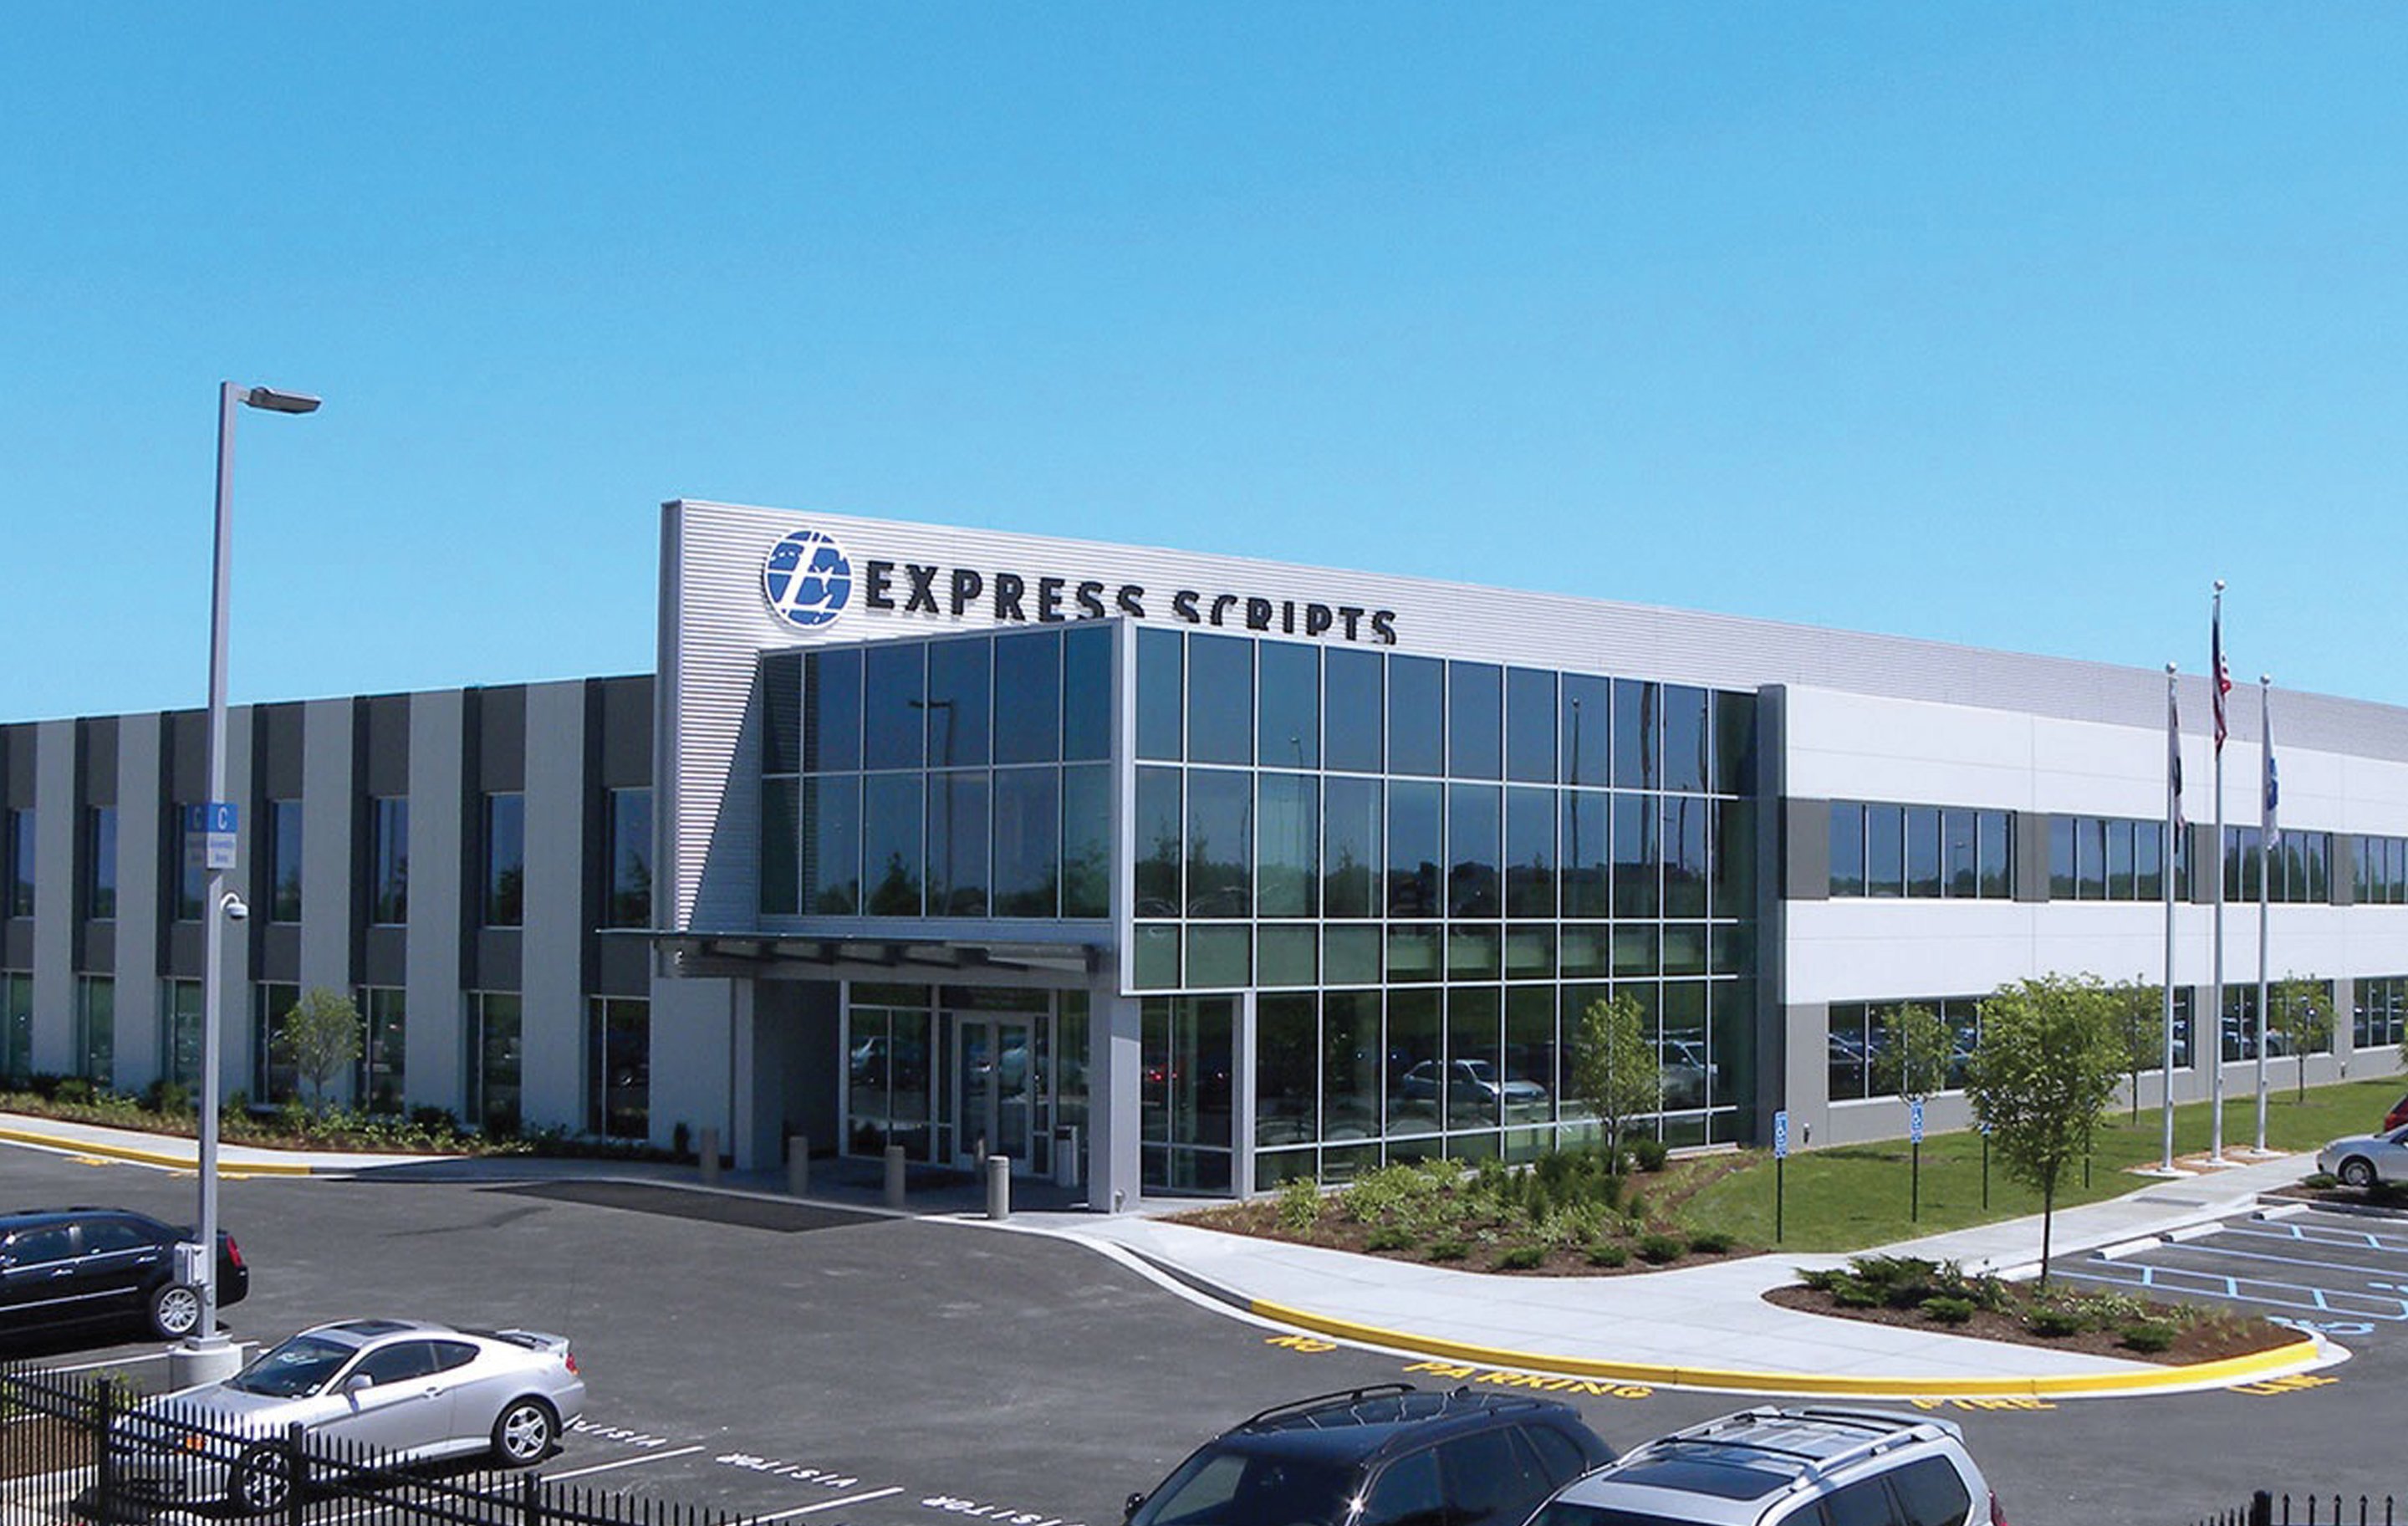 Express Scripts rolls out new copay caps, PBM model with focus on transparency